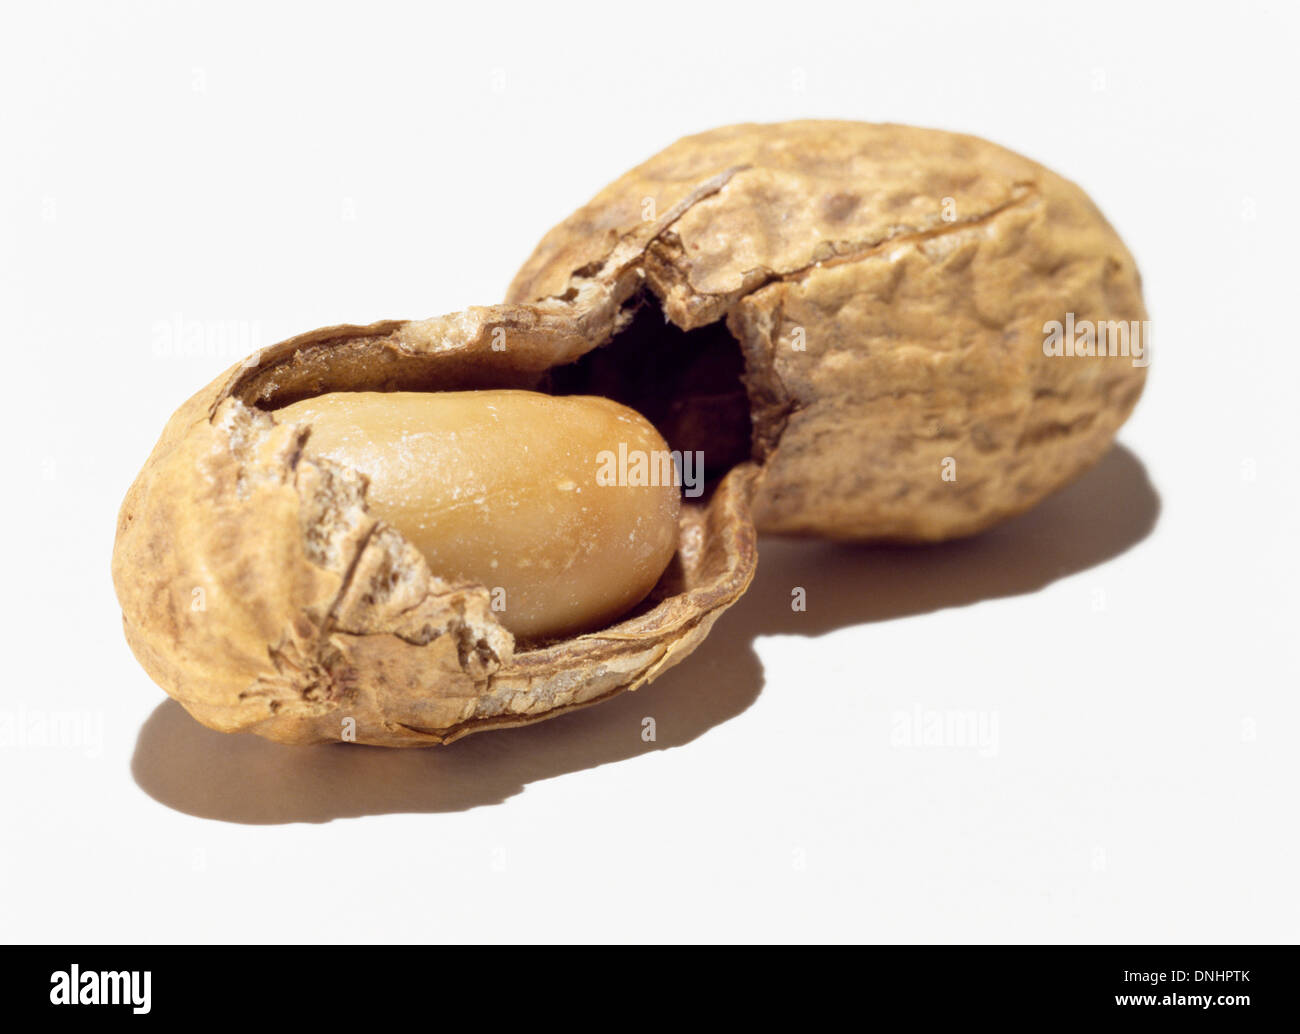 A half opened peanut and shell on a white background. Stock Photo